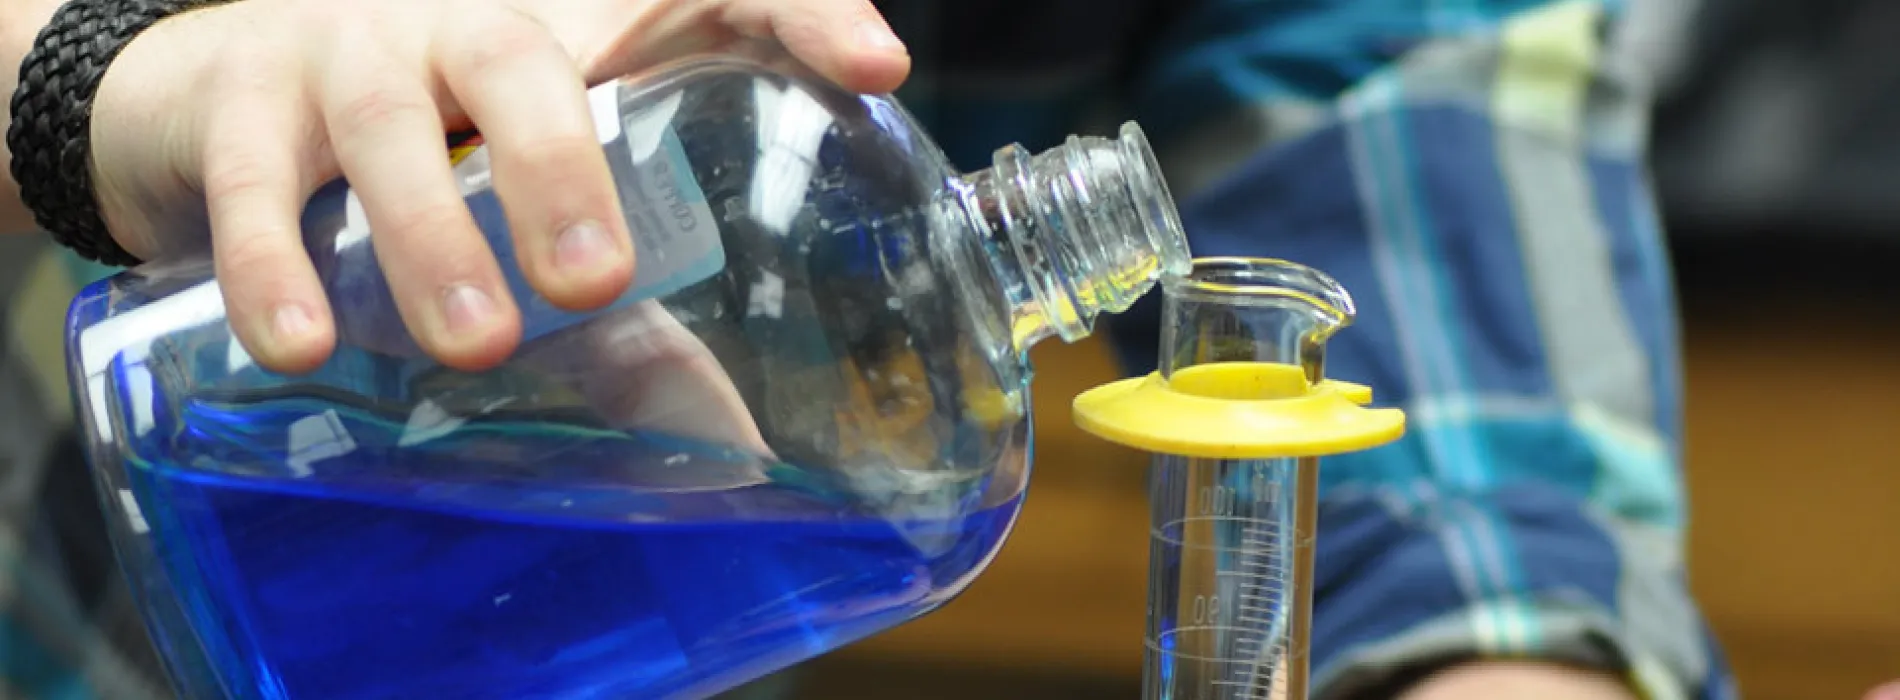 male student hands with cup of blue liquid pouring into a beaker